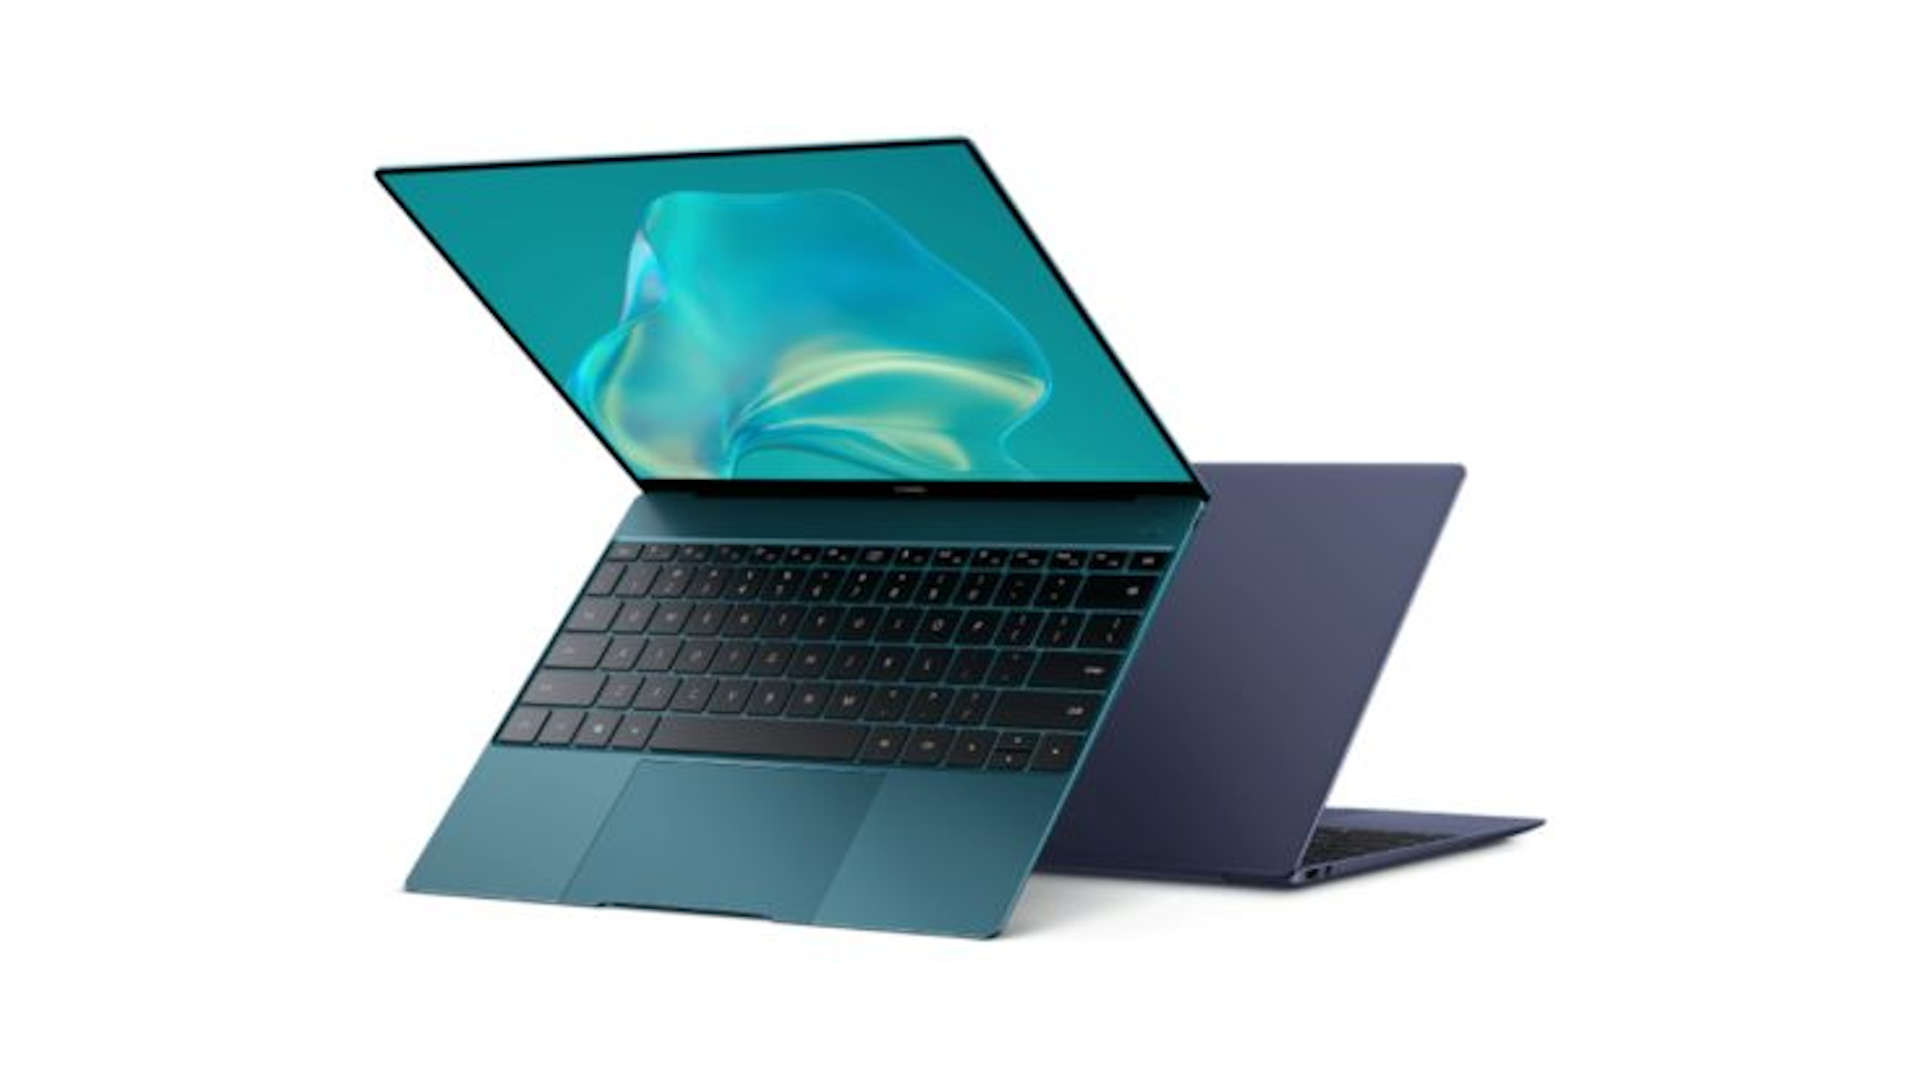 Huawei MateBook X 2020 official: 3K display, i7 10th Gen and Free 